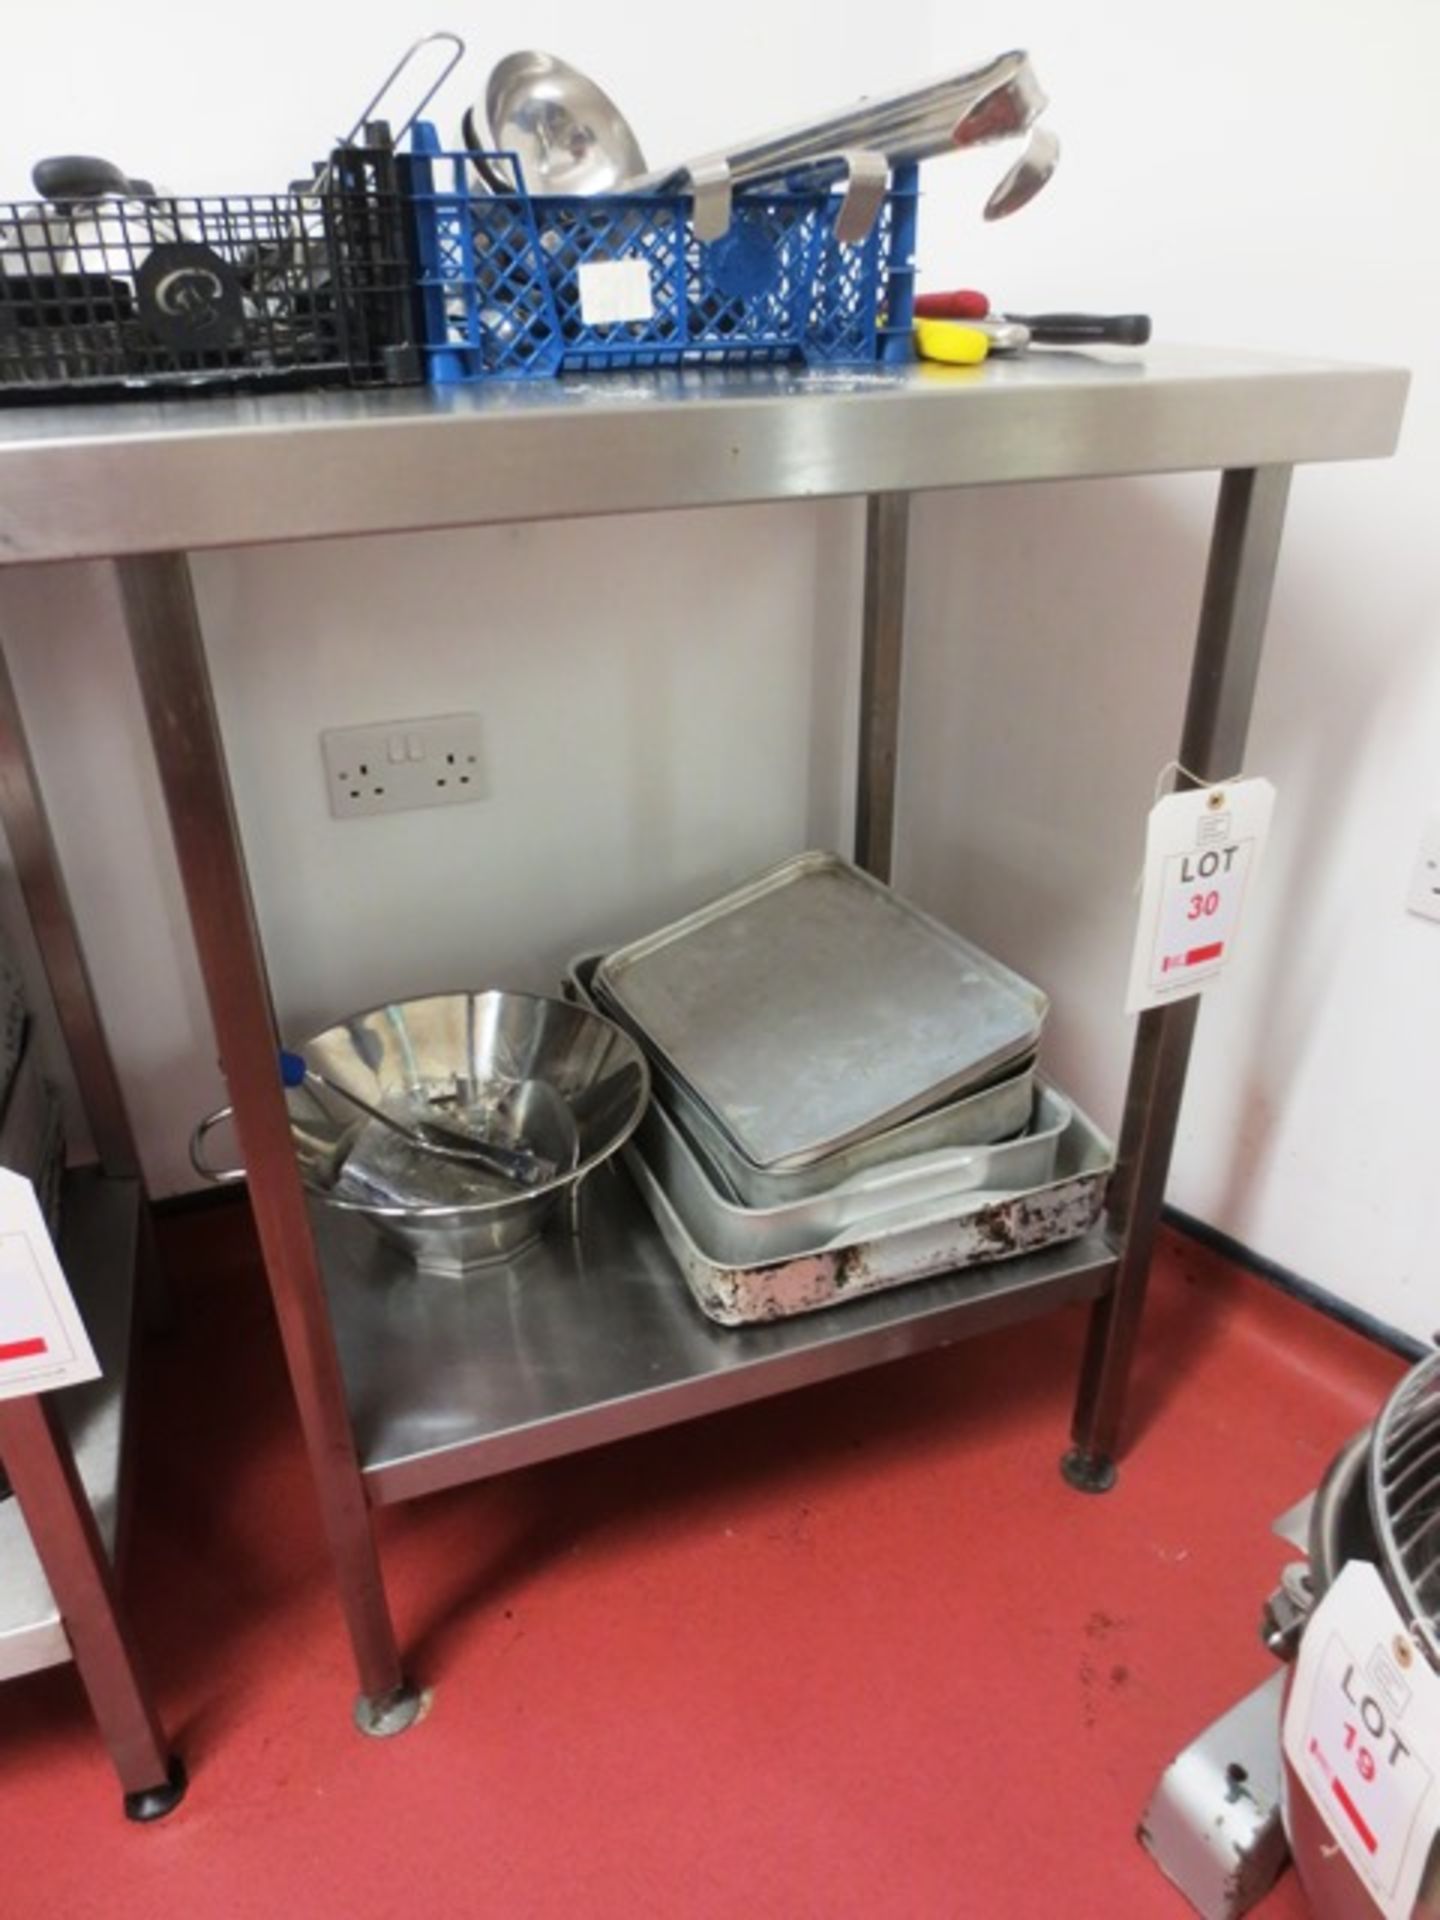 Stainless steel table with under counter shelf, approx dimensions: 760 x 560mm